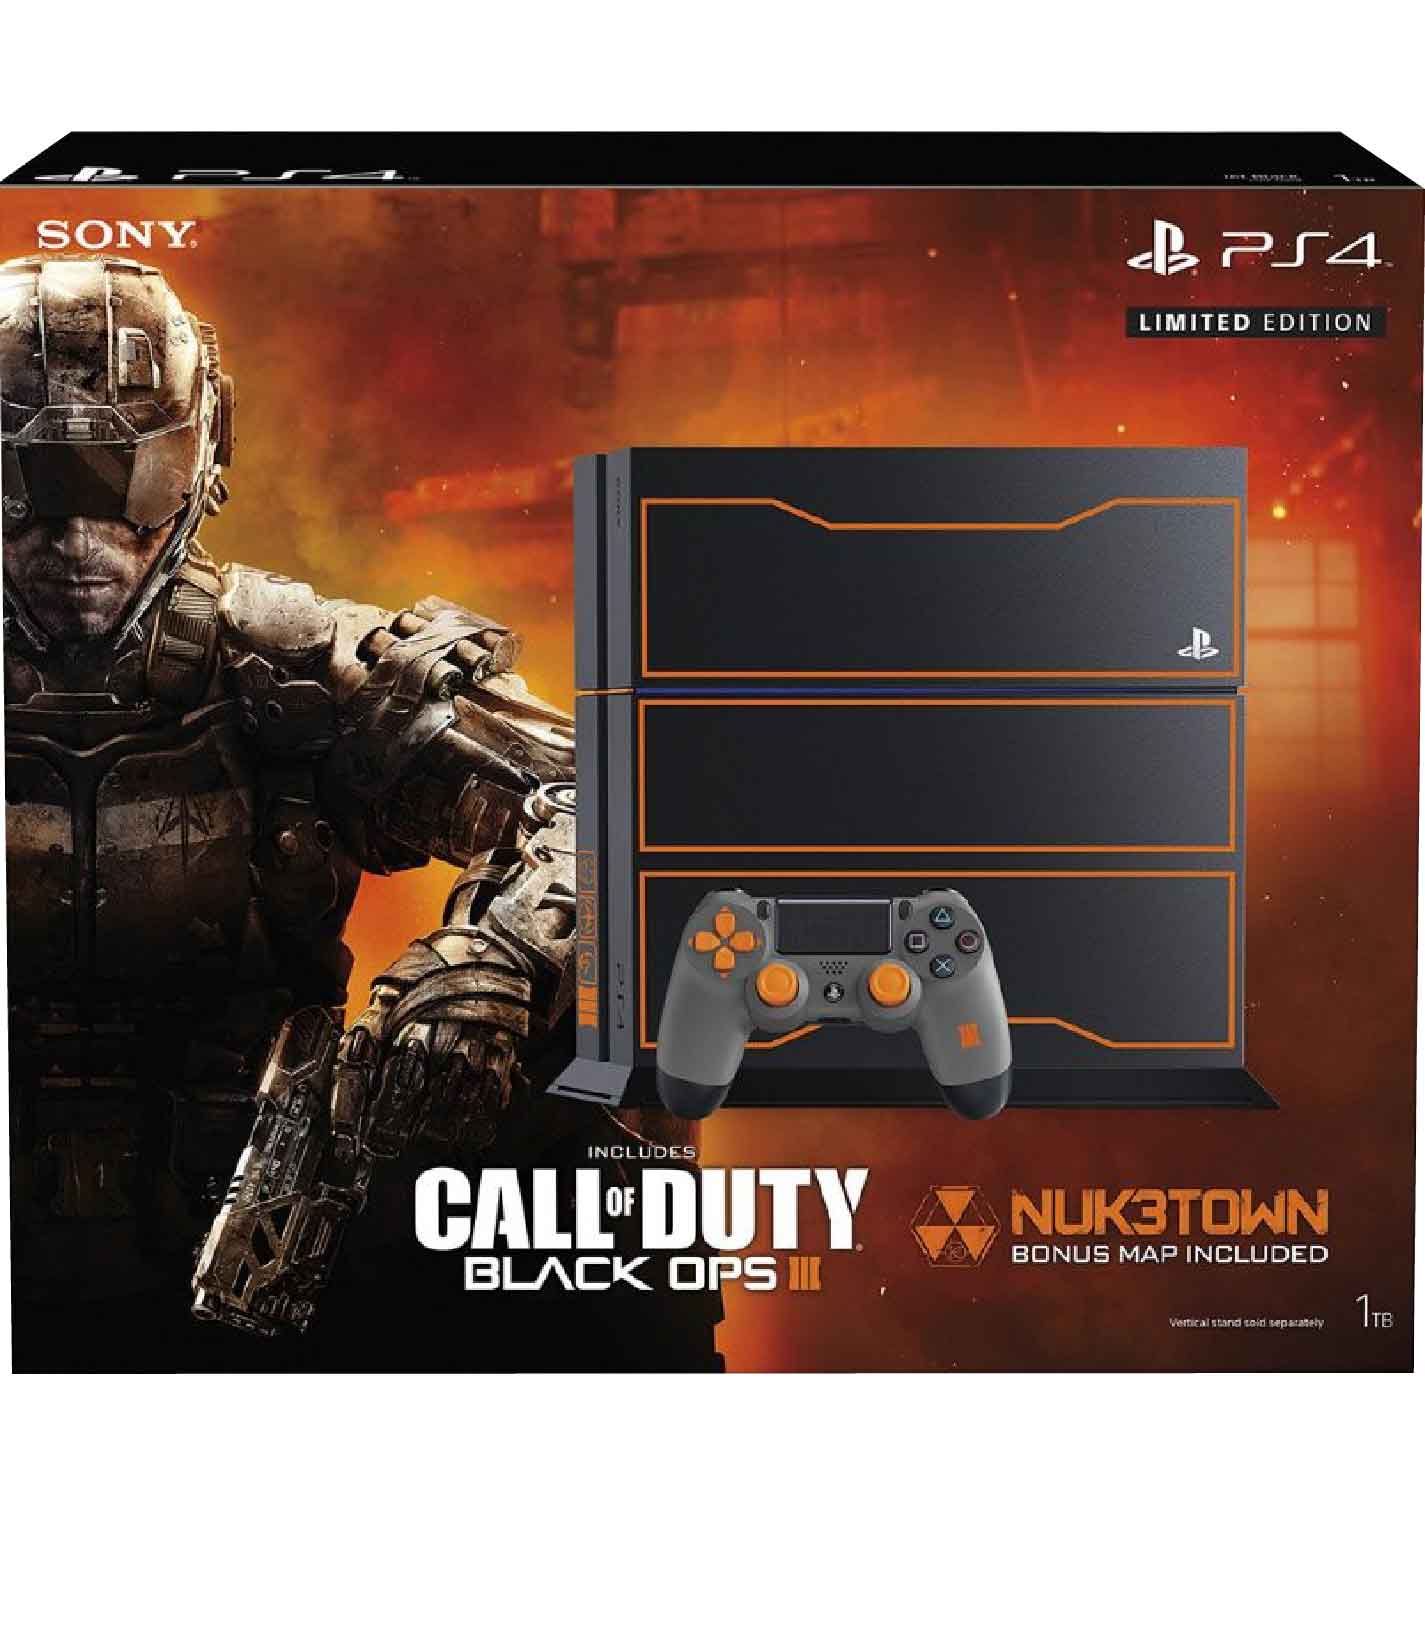 Sony Playstation 4 (PS4) Call of Duty Black Ops 3 LIMITED EDITION Bundle